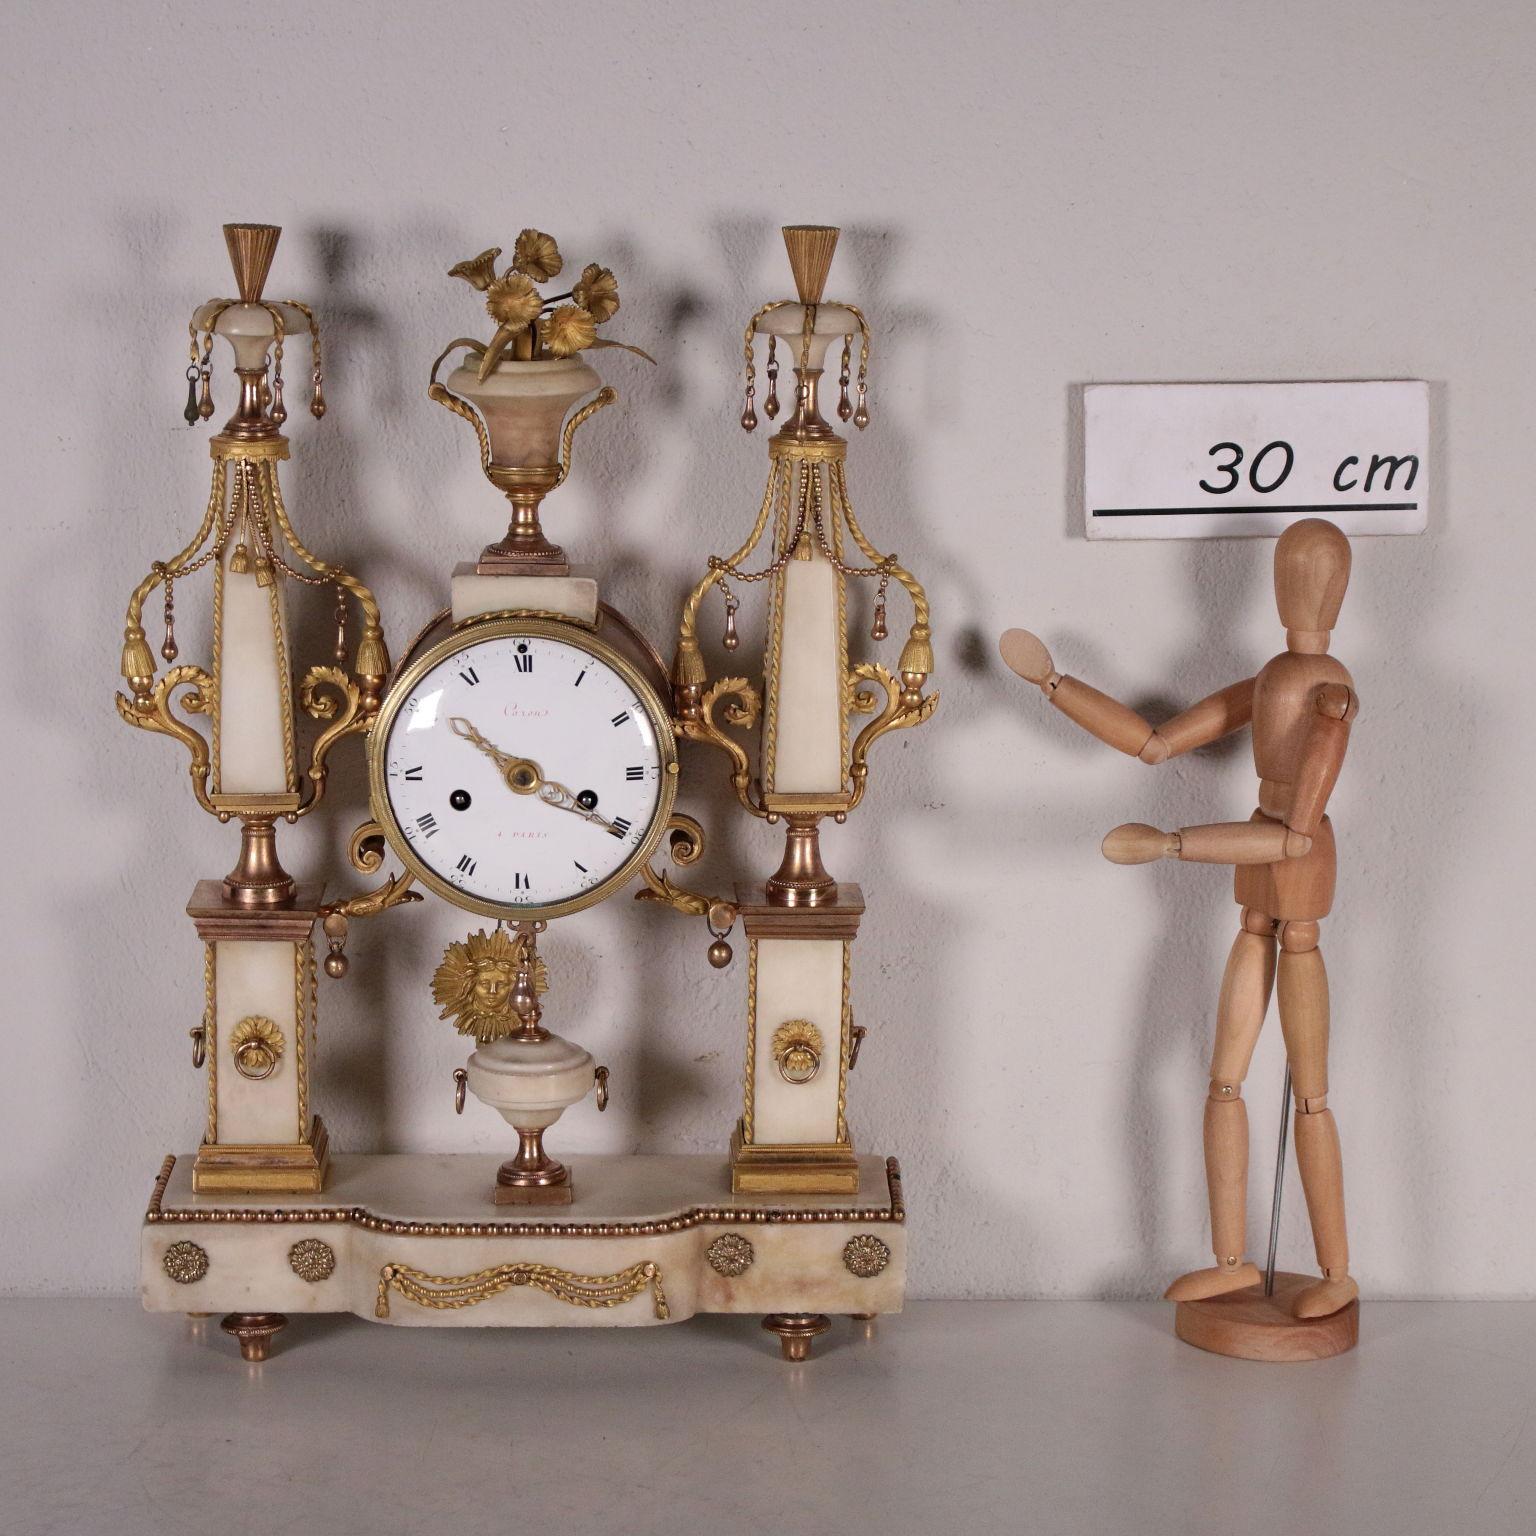 White marble clock with gilded bronze decorations. Two columns with square base stand on the rectangular basement, in the middle of the columns there is the cylindrical shaped clock. The white marble is enriched by decorations in gilded bronze,